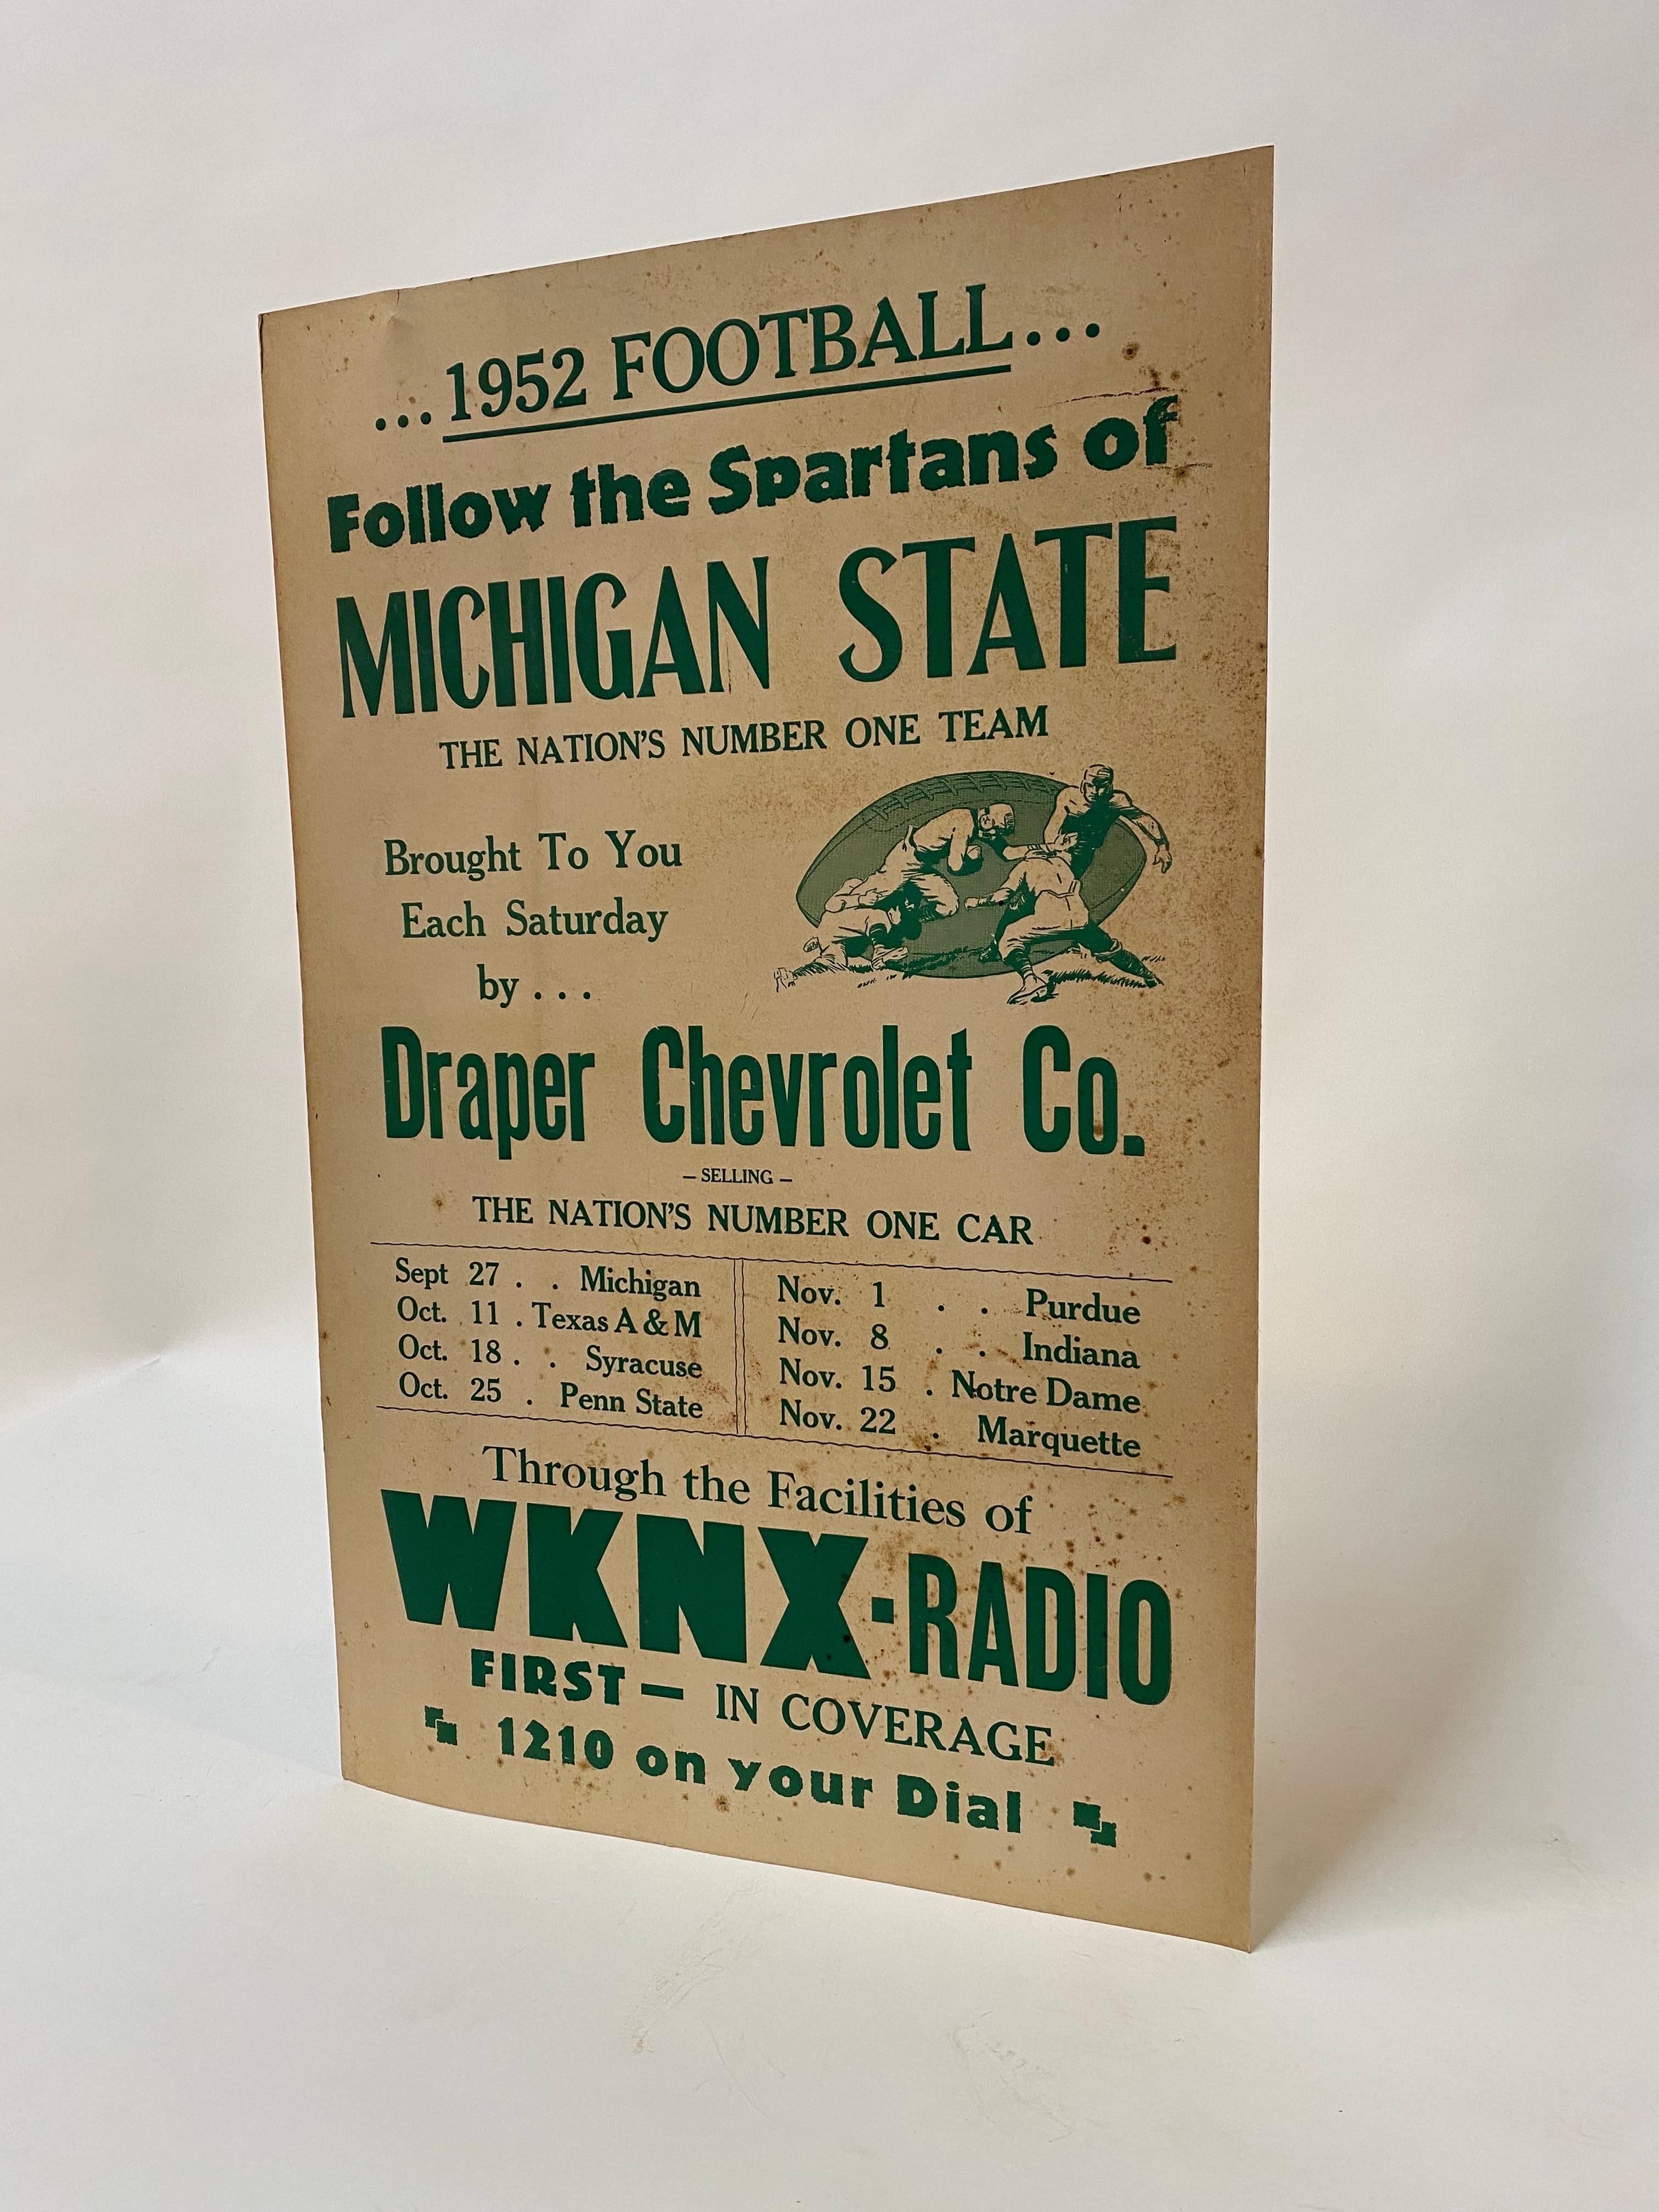 Straight from the Spartan alumnus and their estate. Graduating in 1952 in Graphic Arts, he was a rabid sports fan. This calendar was procured from his study. Green graphics on heavier poster board style paper. The poster promotes the upcoming